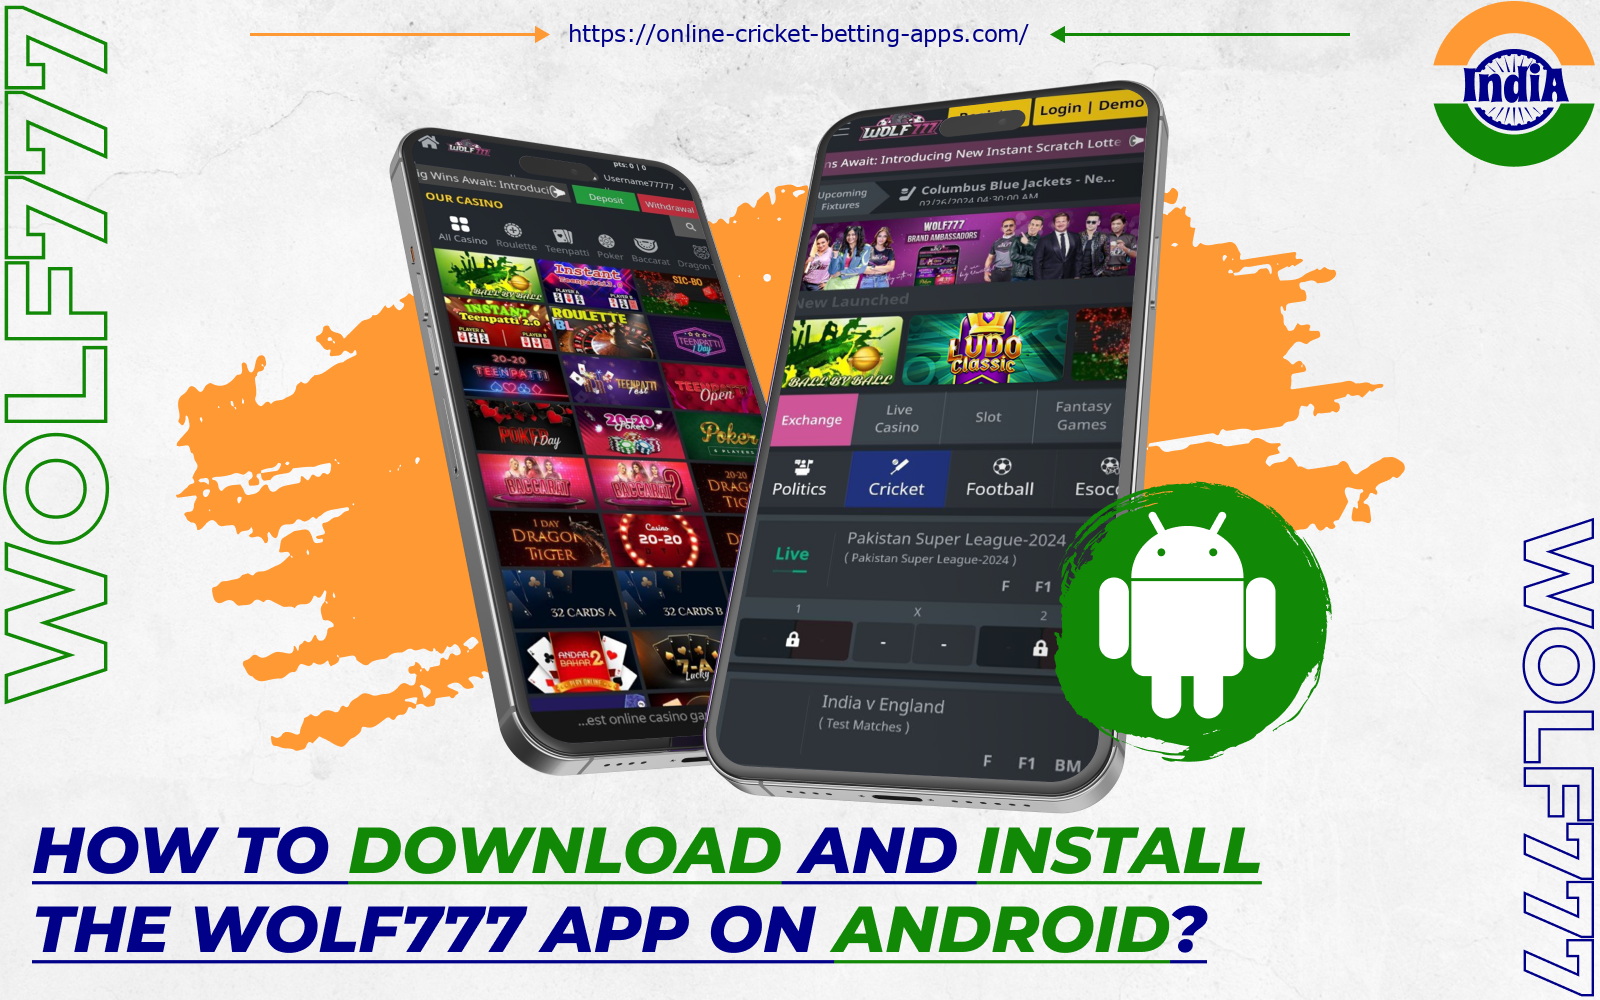 The Wolf777 Android app offers Indian bettors the same features and functionality as the website, in a more mobile-friendly format